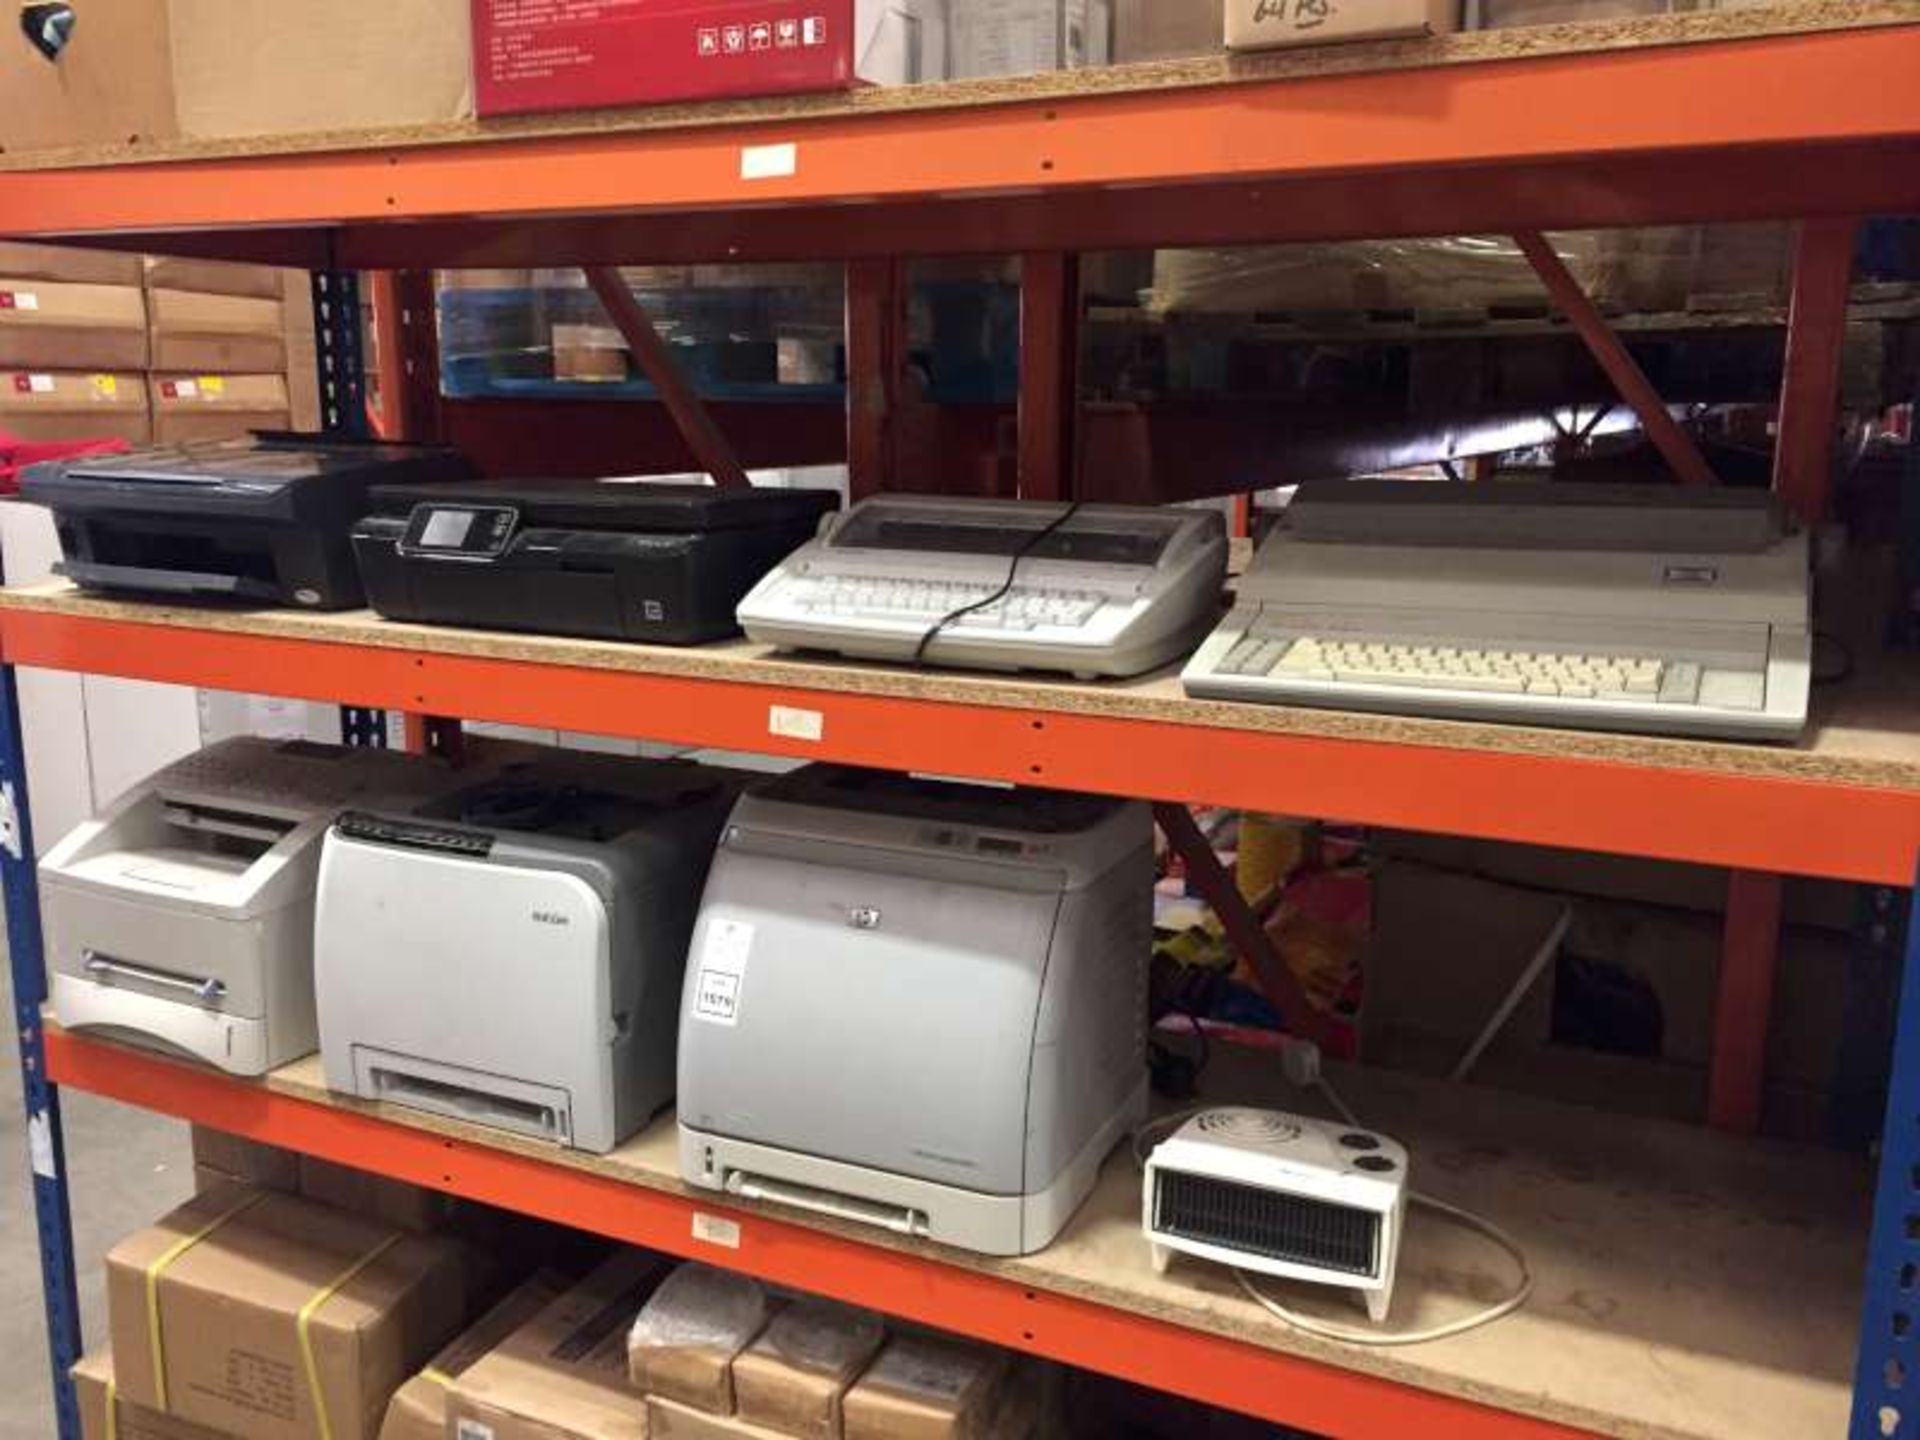 LOT CONTAINING 5 X PRINTERS, 2 X ELECTRIC TYPE WRITERS AND A HEATER